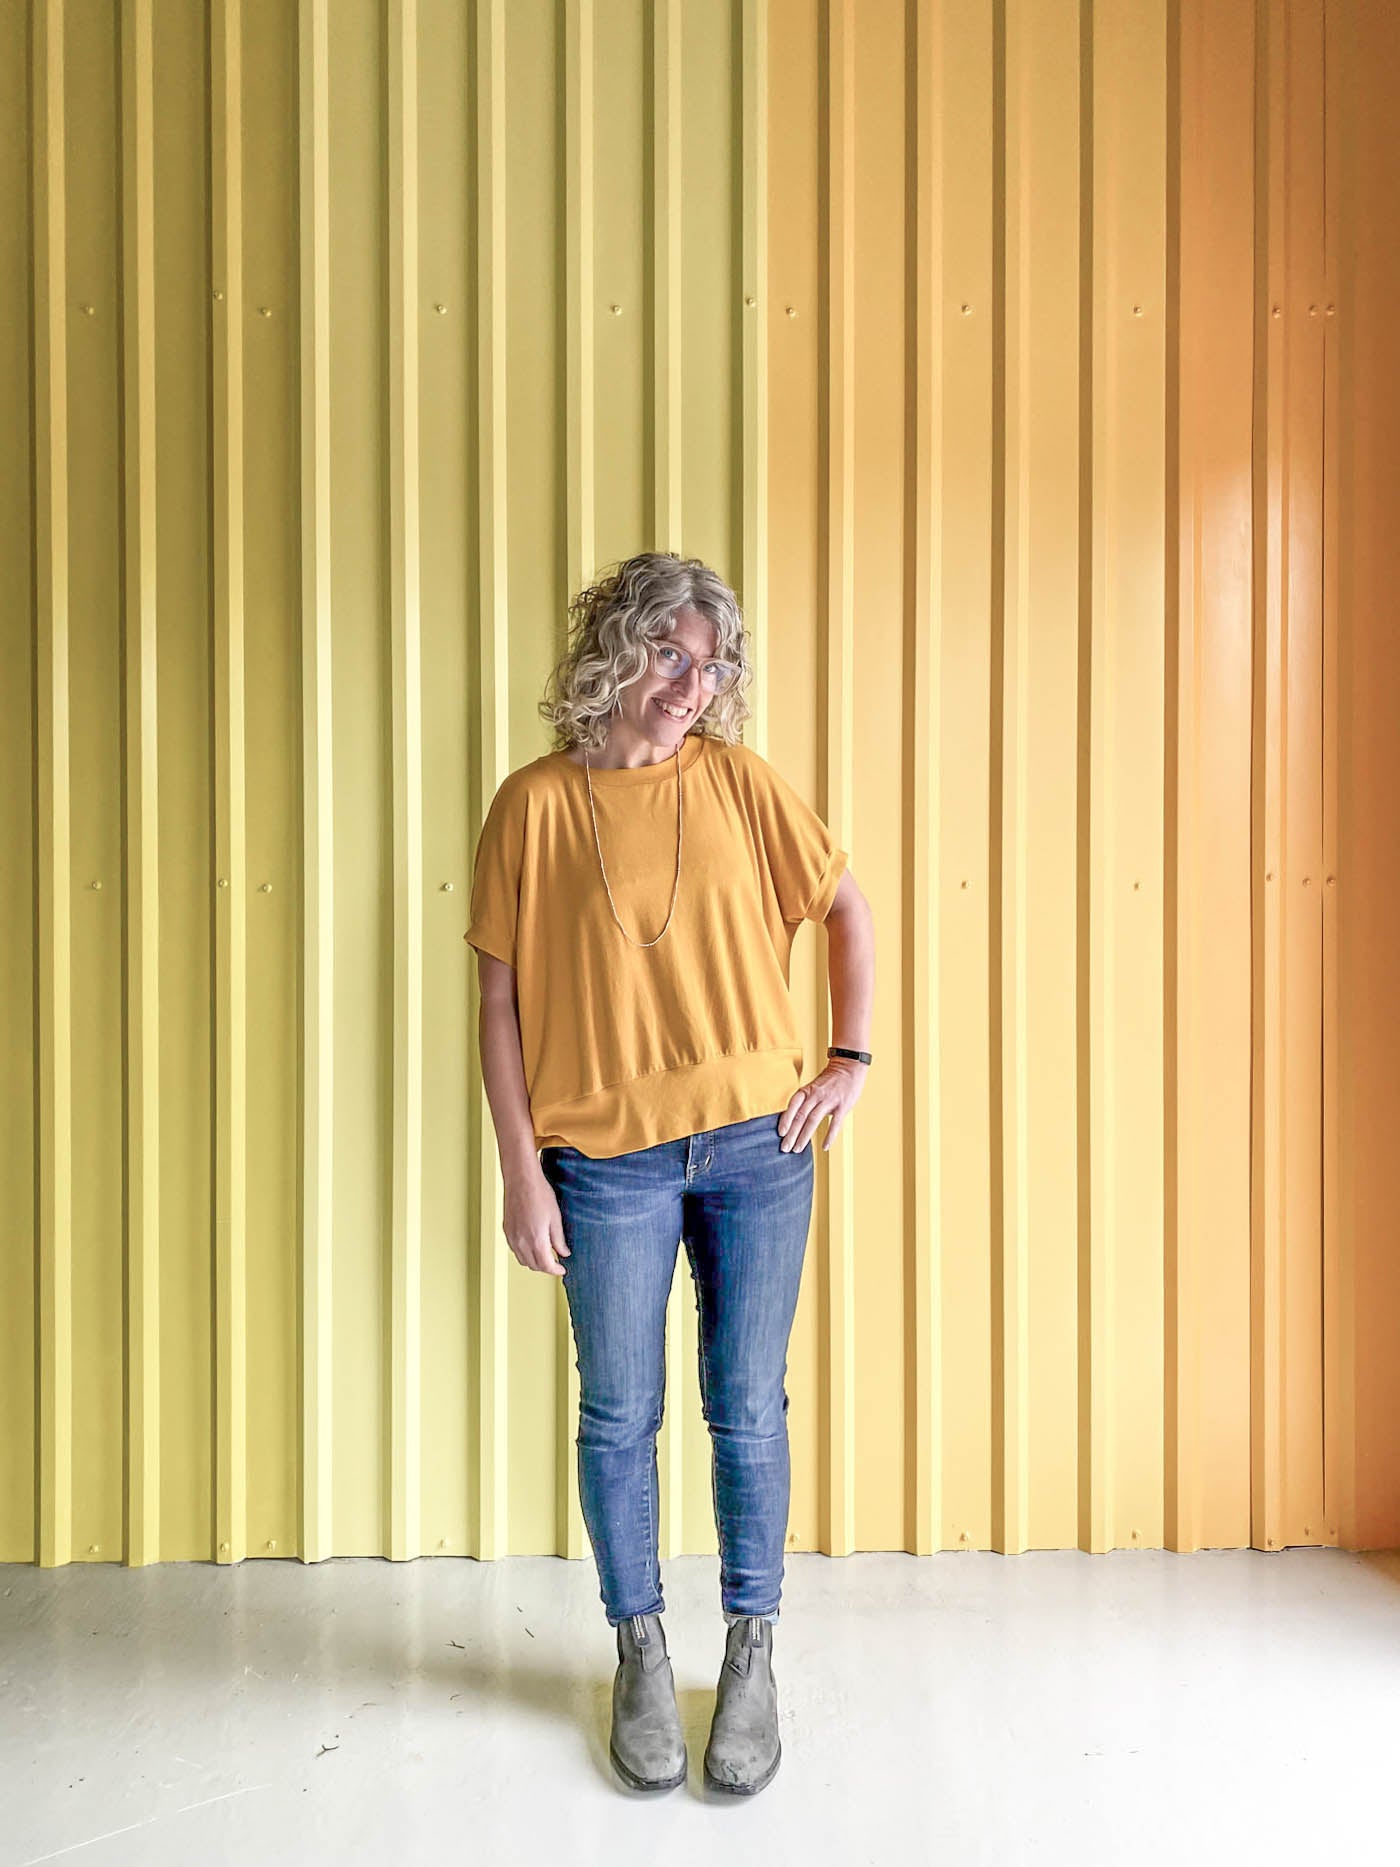 Jaime wearing a golden yellow Hosta tee, jeans and black boots, standing in front of a corrugated yellow ombre wall.